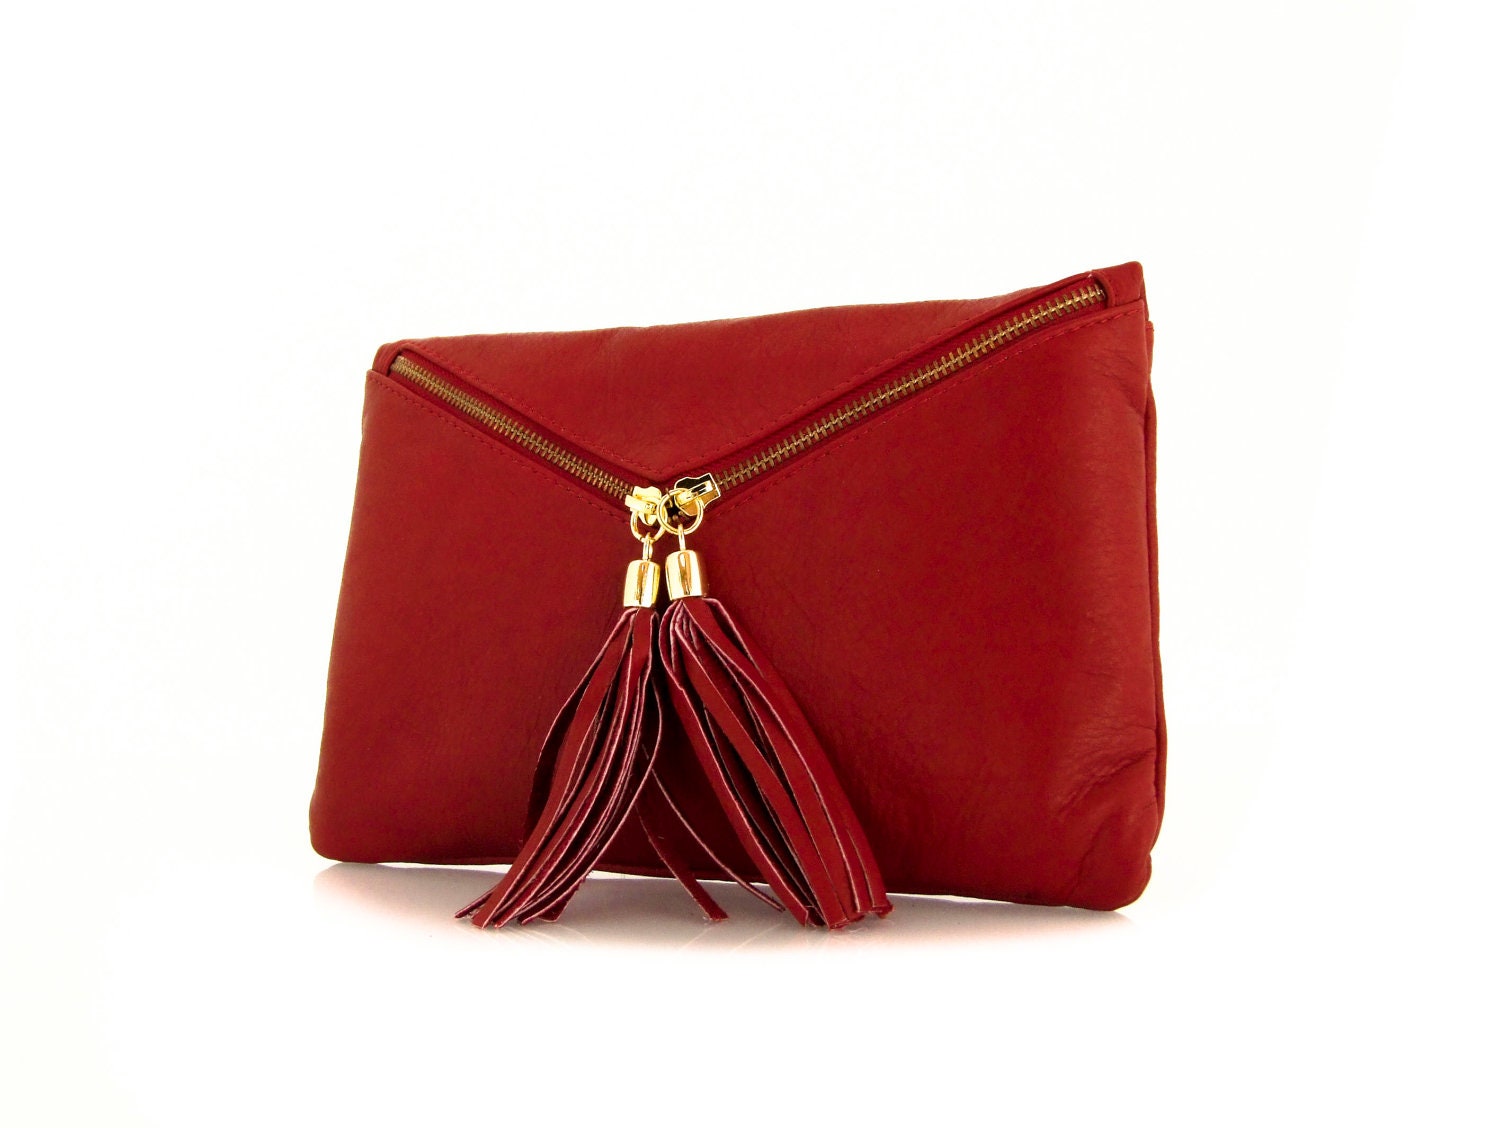 Handmade Clutch Bag Dark Red Italian Leather by TRACCEleather